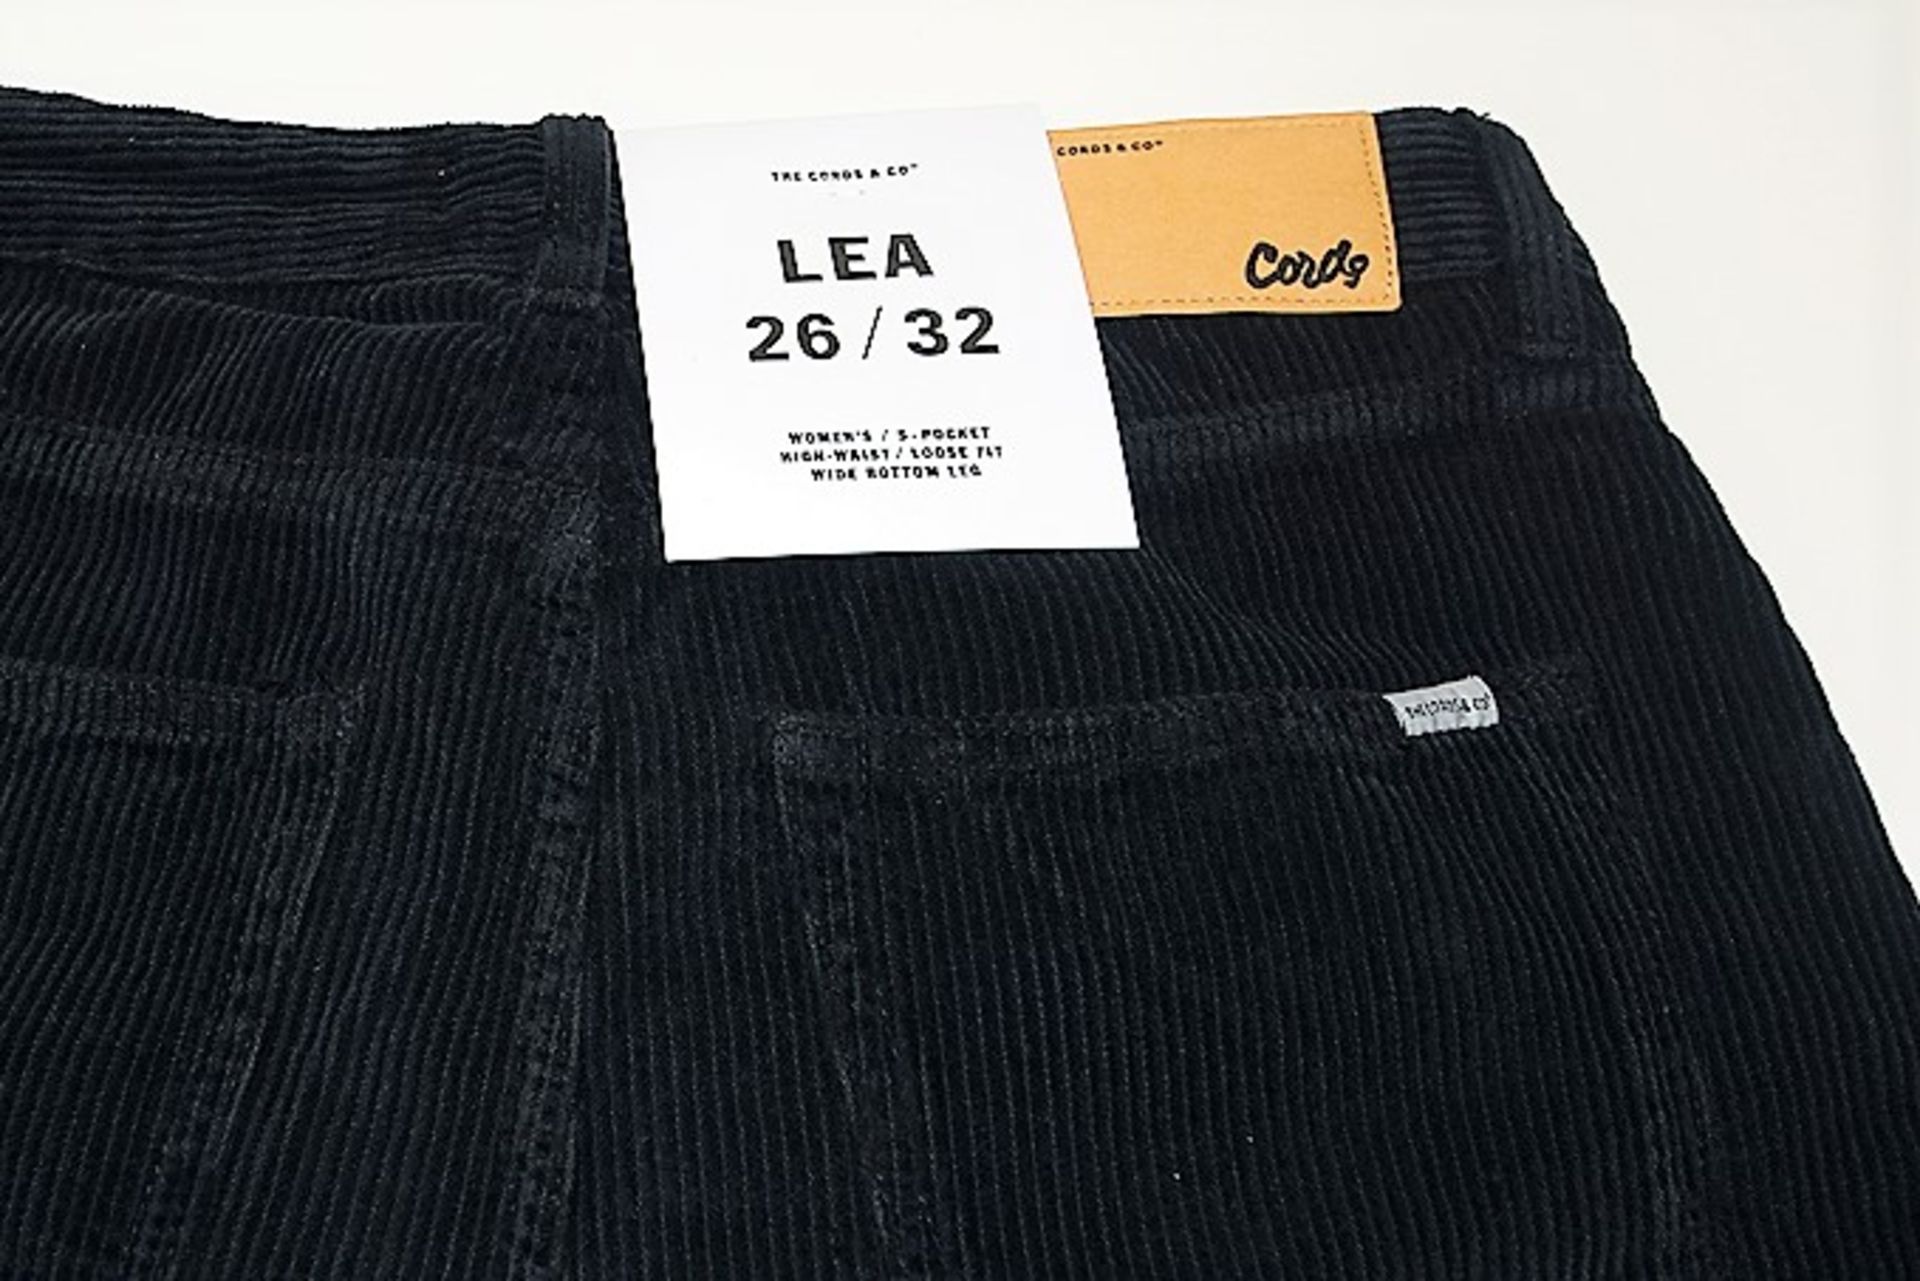 The Cords & Co. "Lea" Women's/ High-Waist/ Loose Fit/ Wide Bottom Pants MSRP $160 - Image 7 of 7